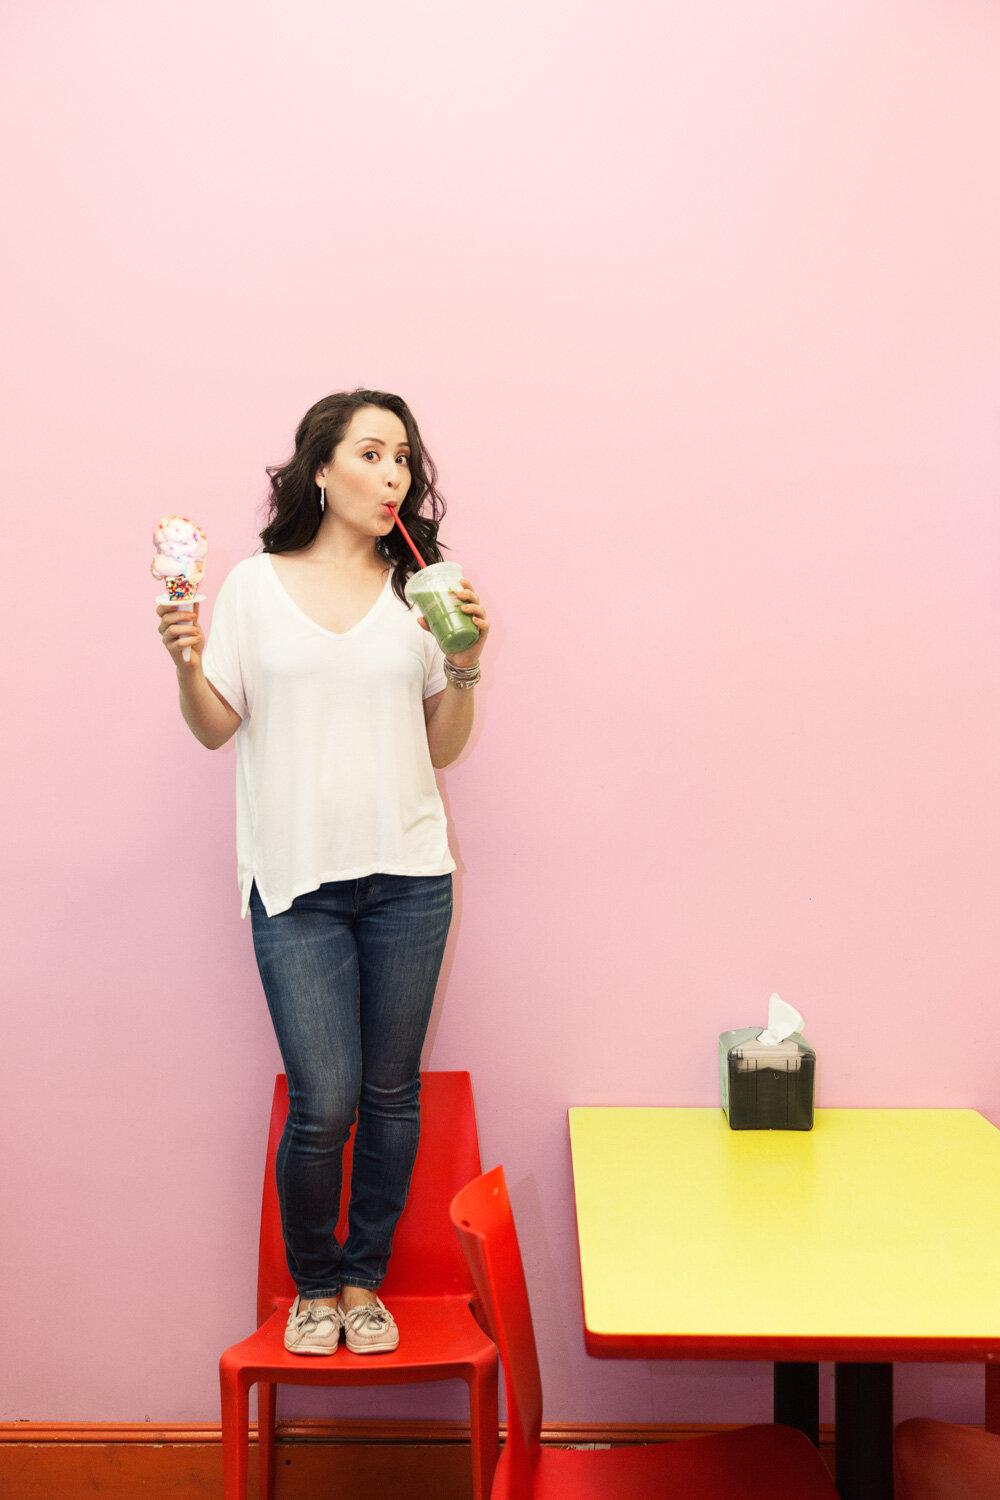 quirky portrait of comedian Catherine Geller sipping green juice while holding an ice cream cone